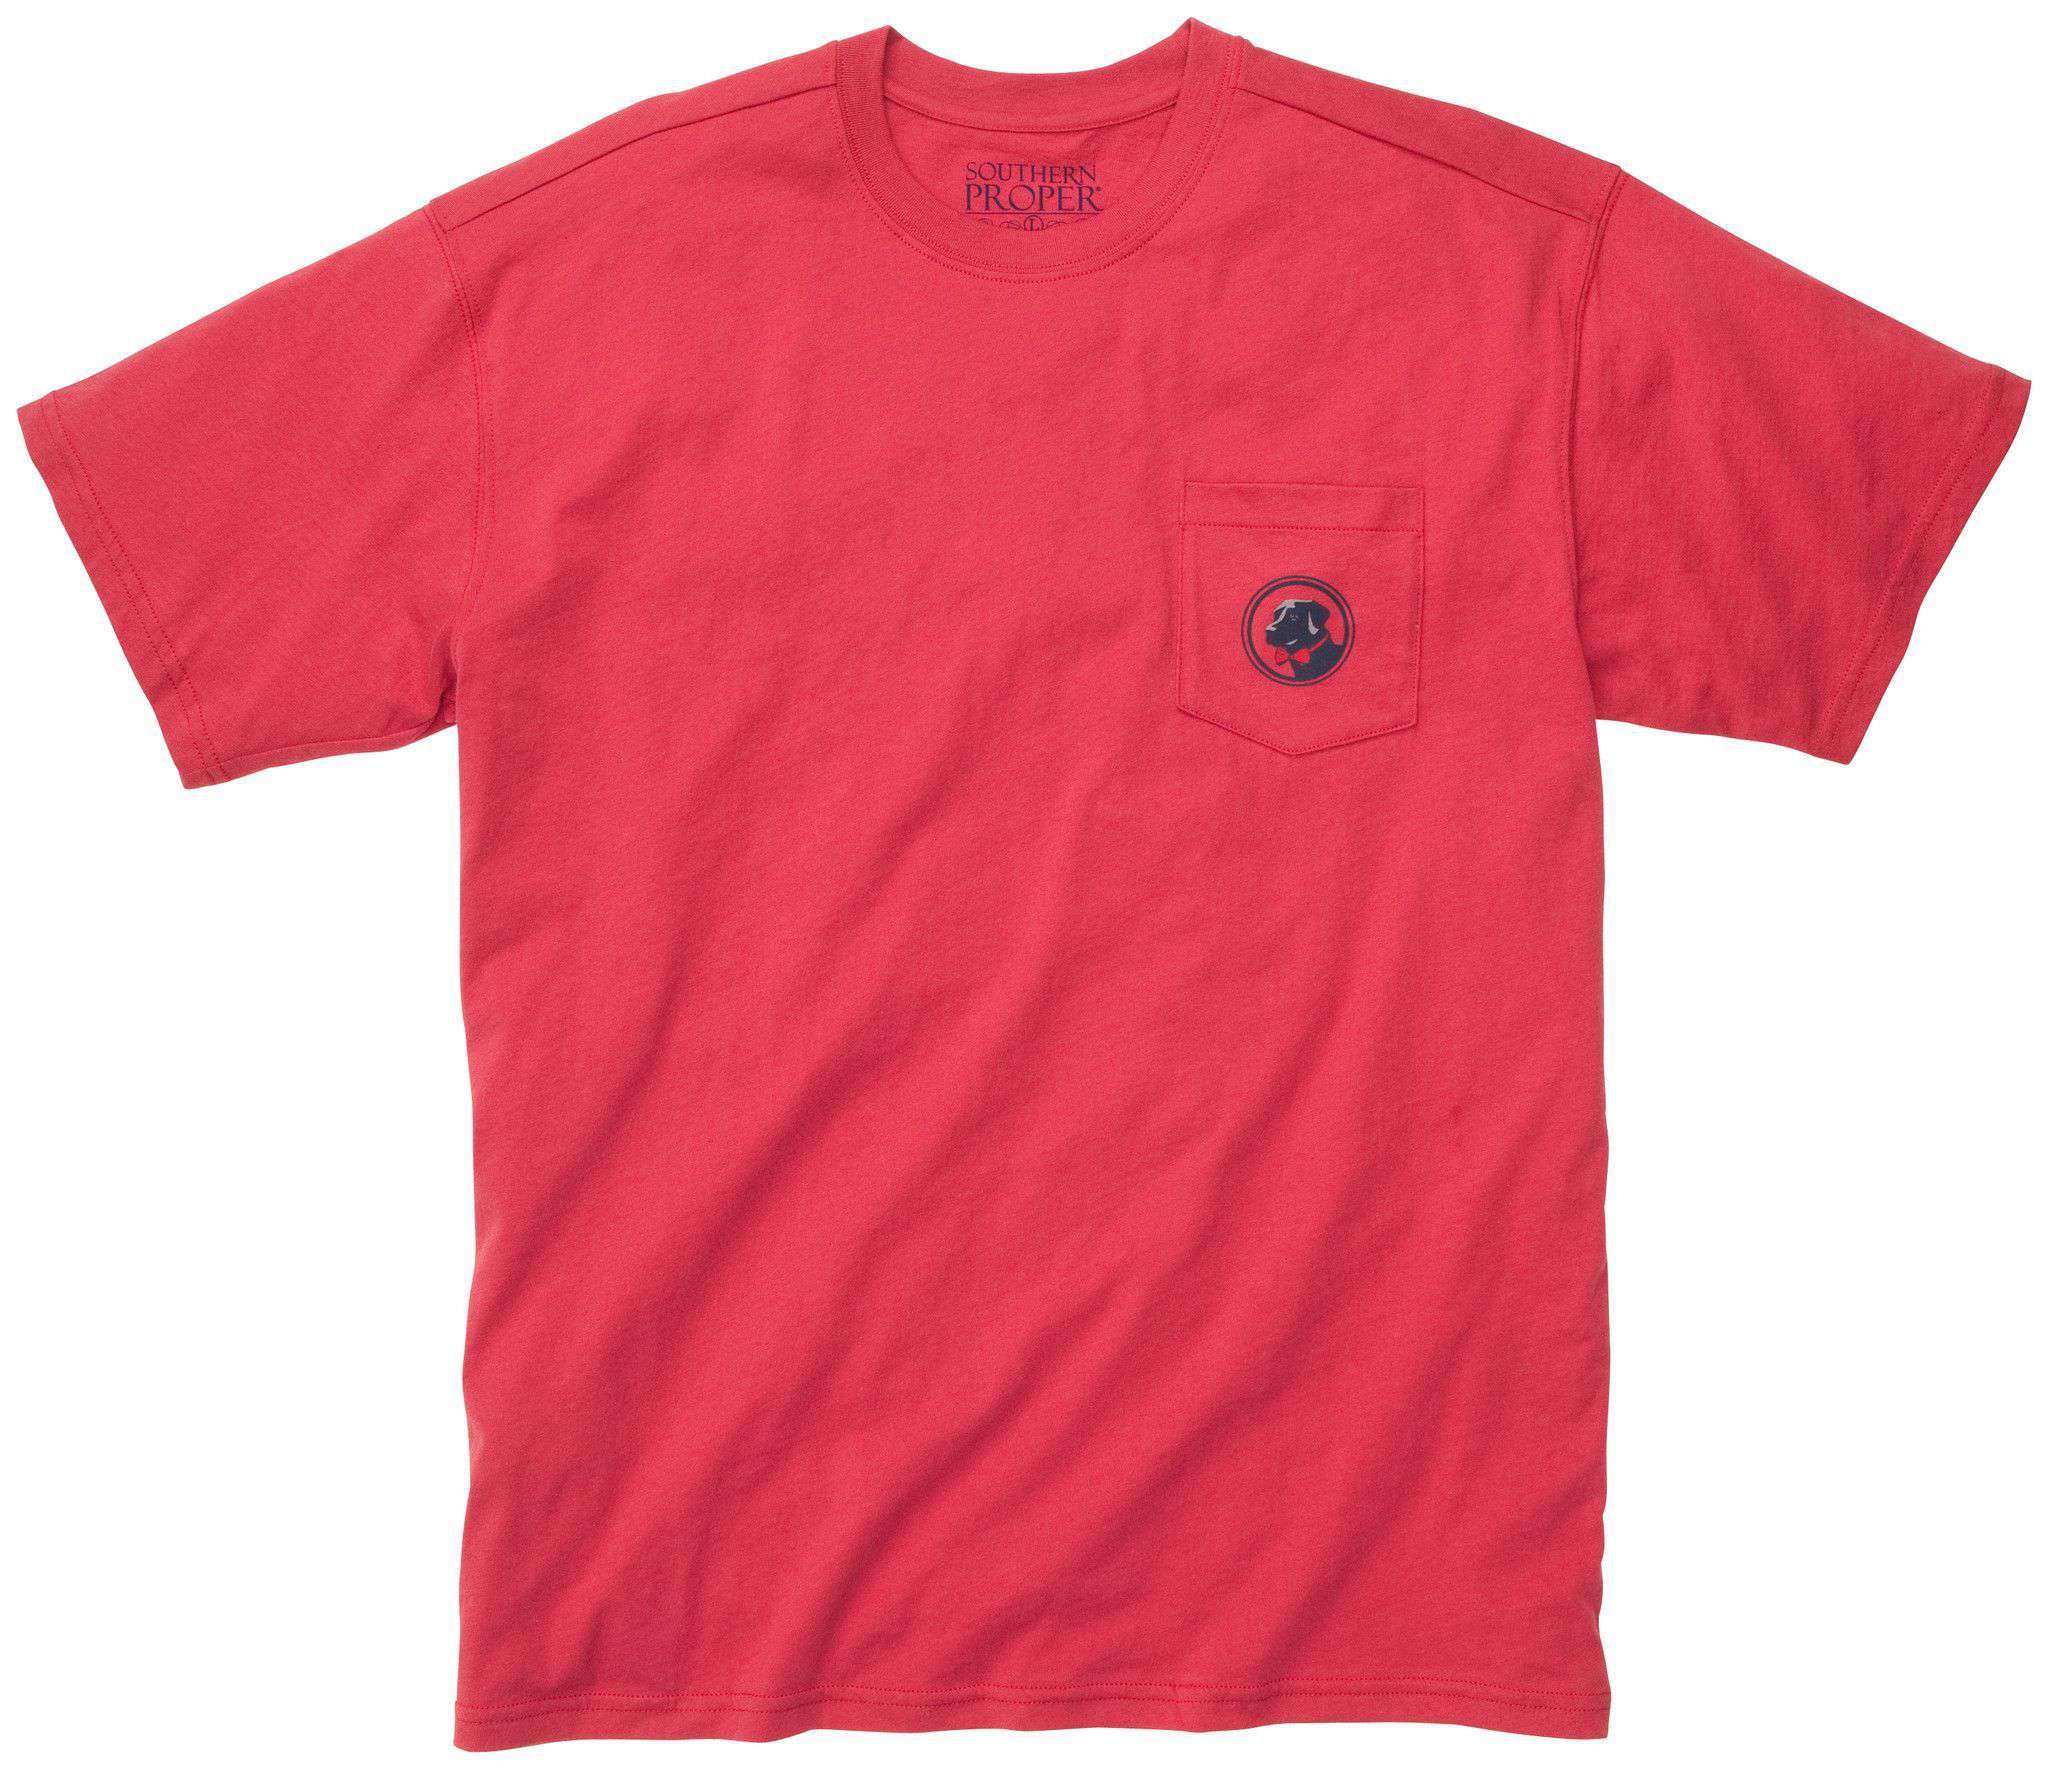 House Rules Tee in Red by Southern Proper - Country Club Prep